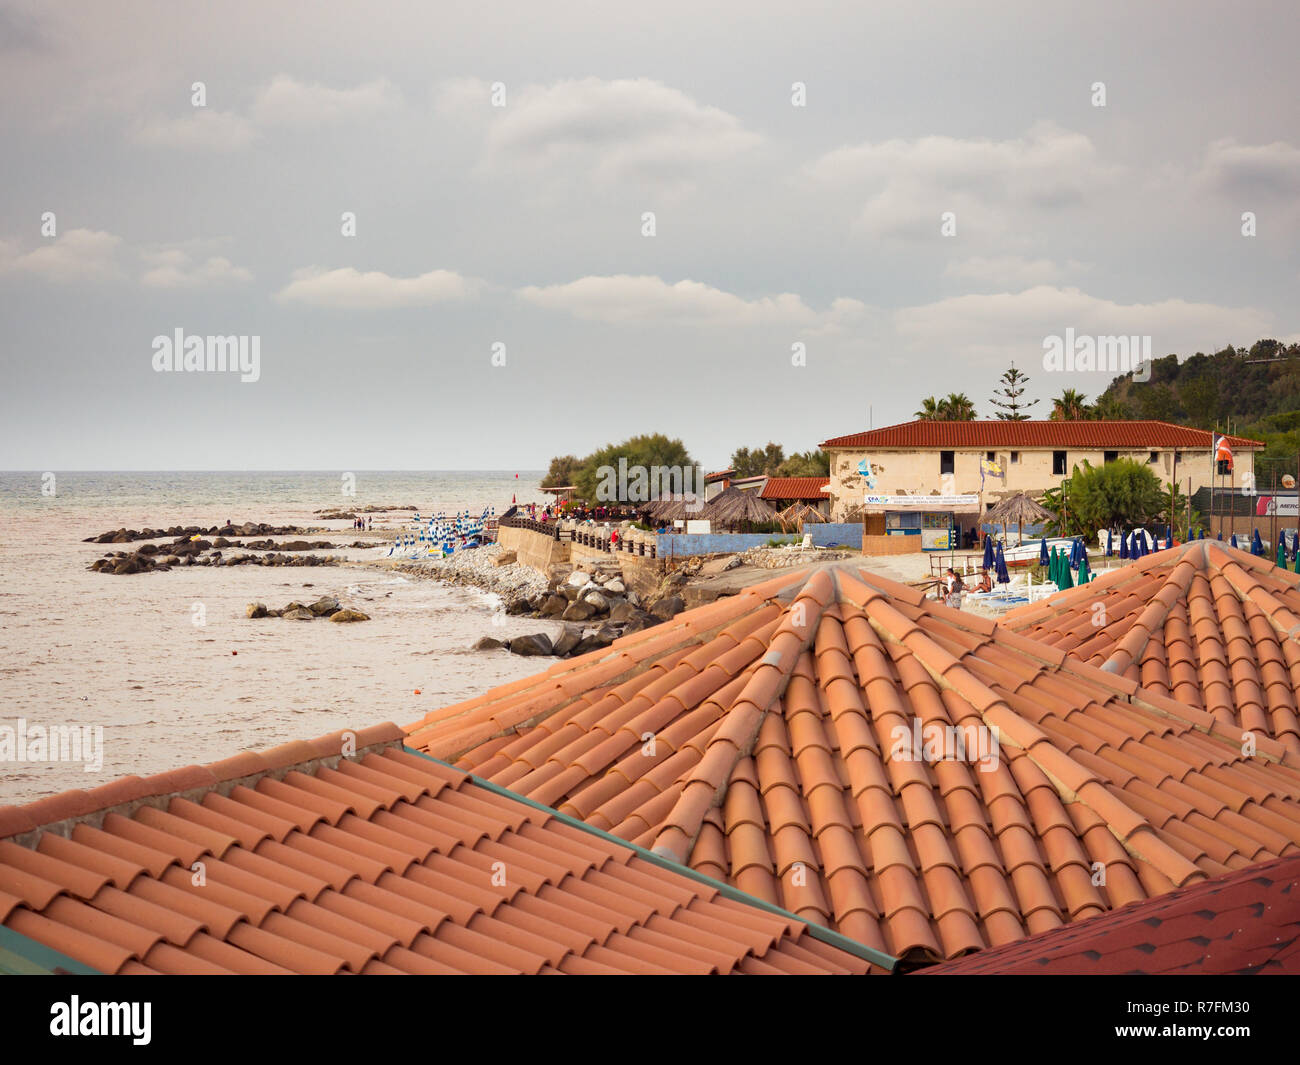 Tourist village in southern Italy on the coast of the Mediterranean Sea. Stock Photo